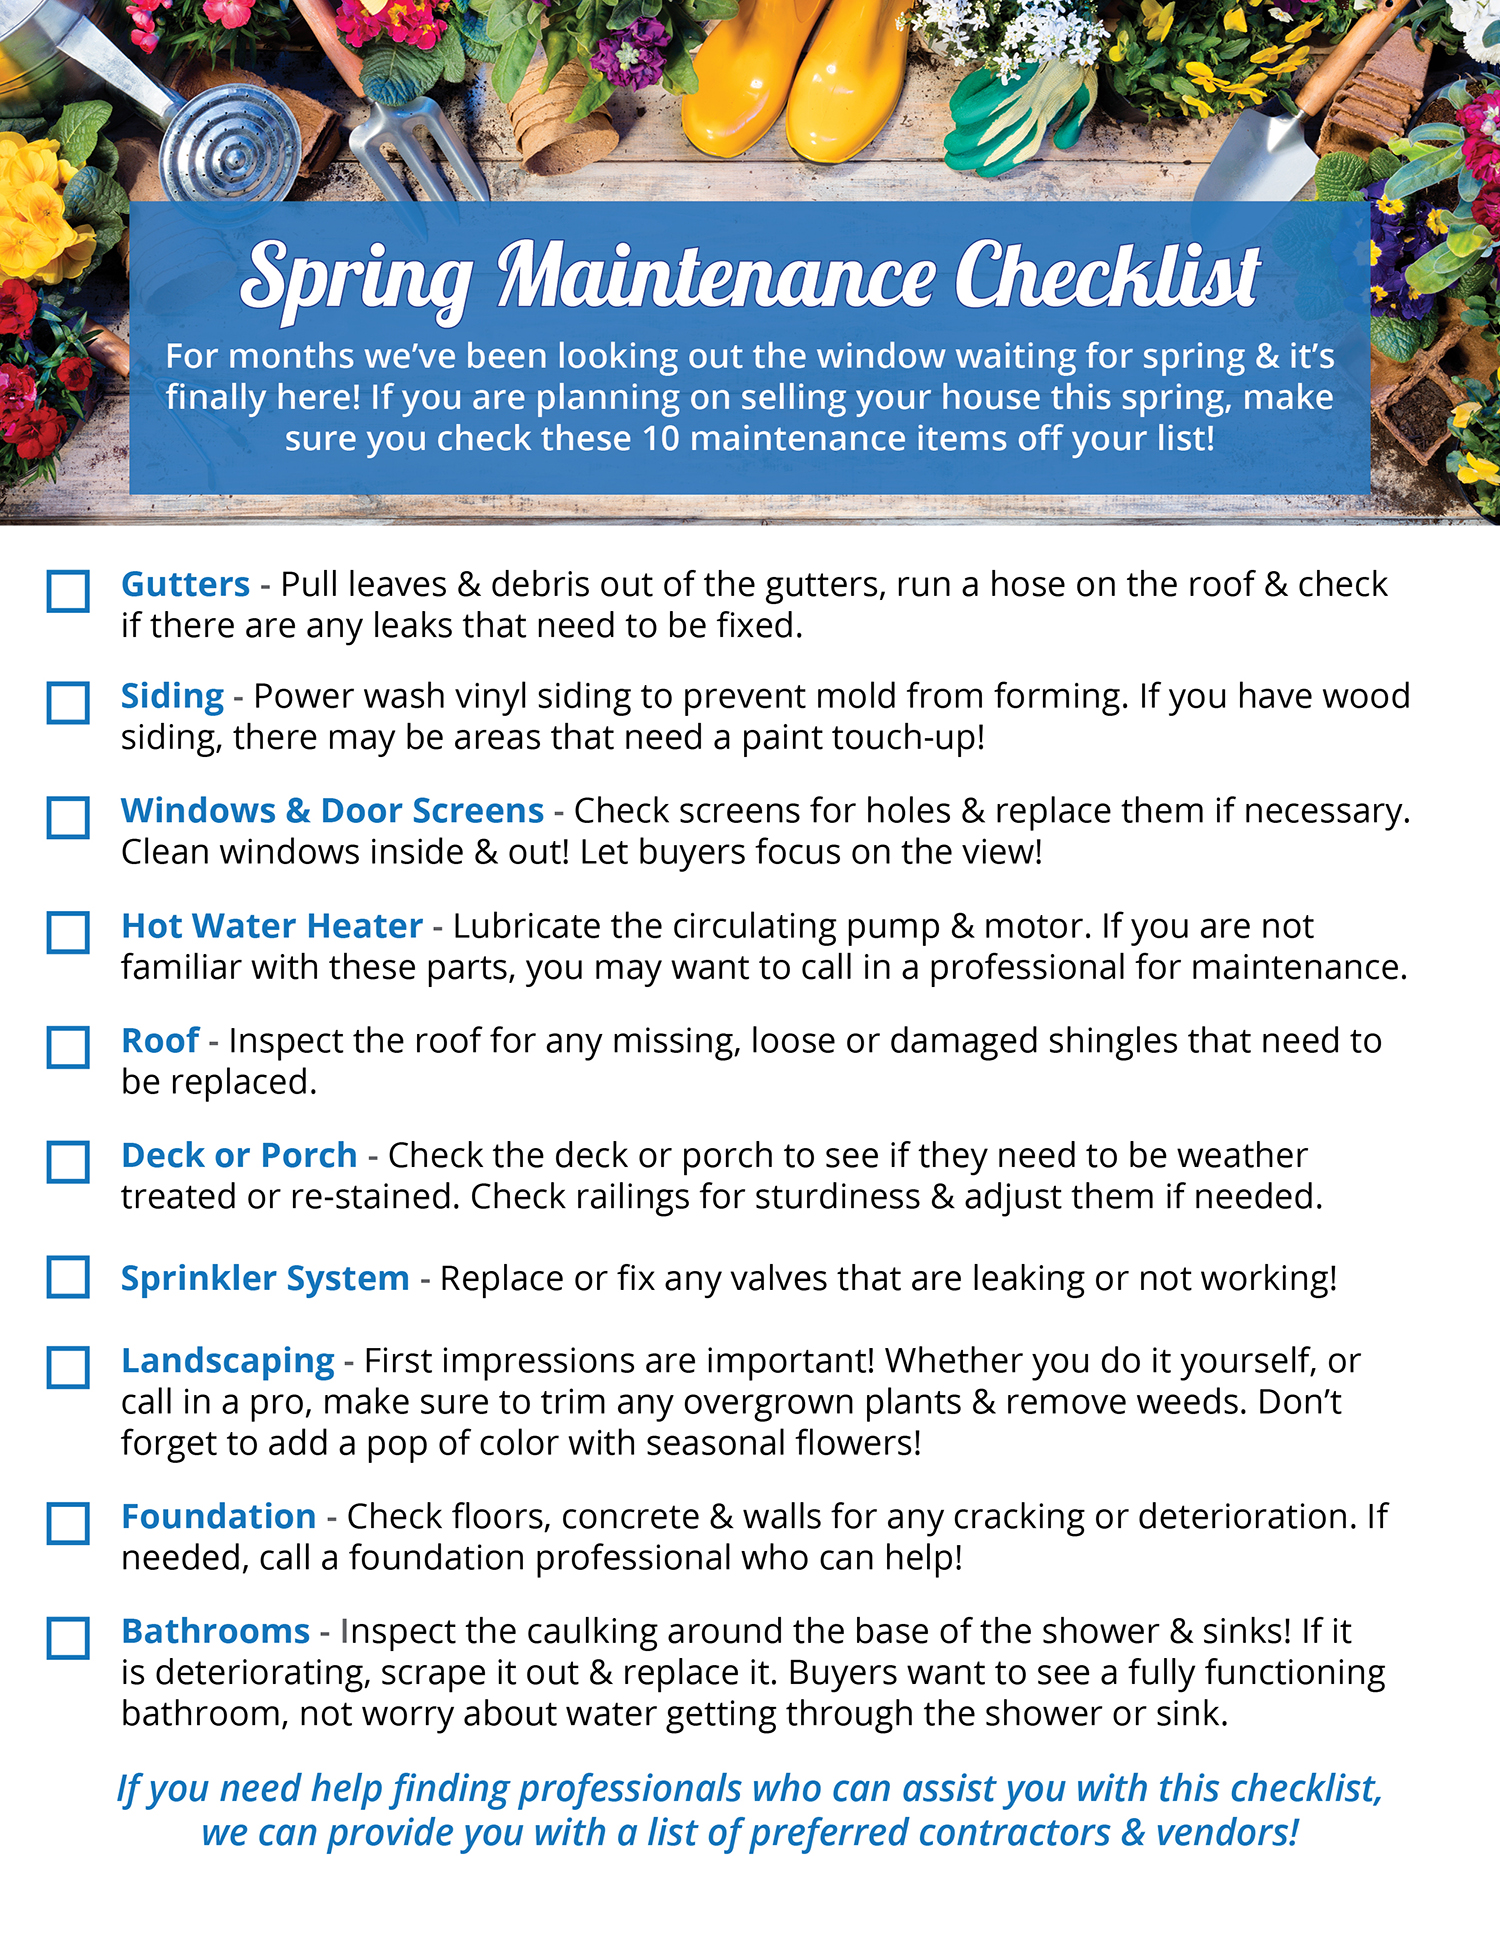 Your Home’s Spring Maintenance Checklist [INFOGRAPHIC] | Simplifying The Market